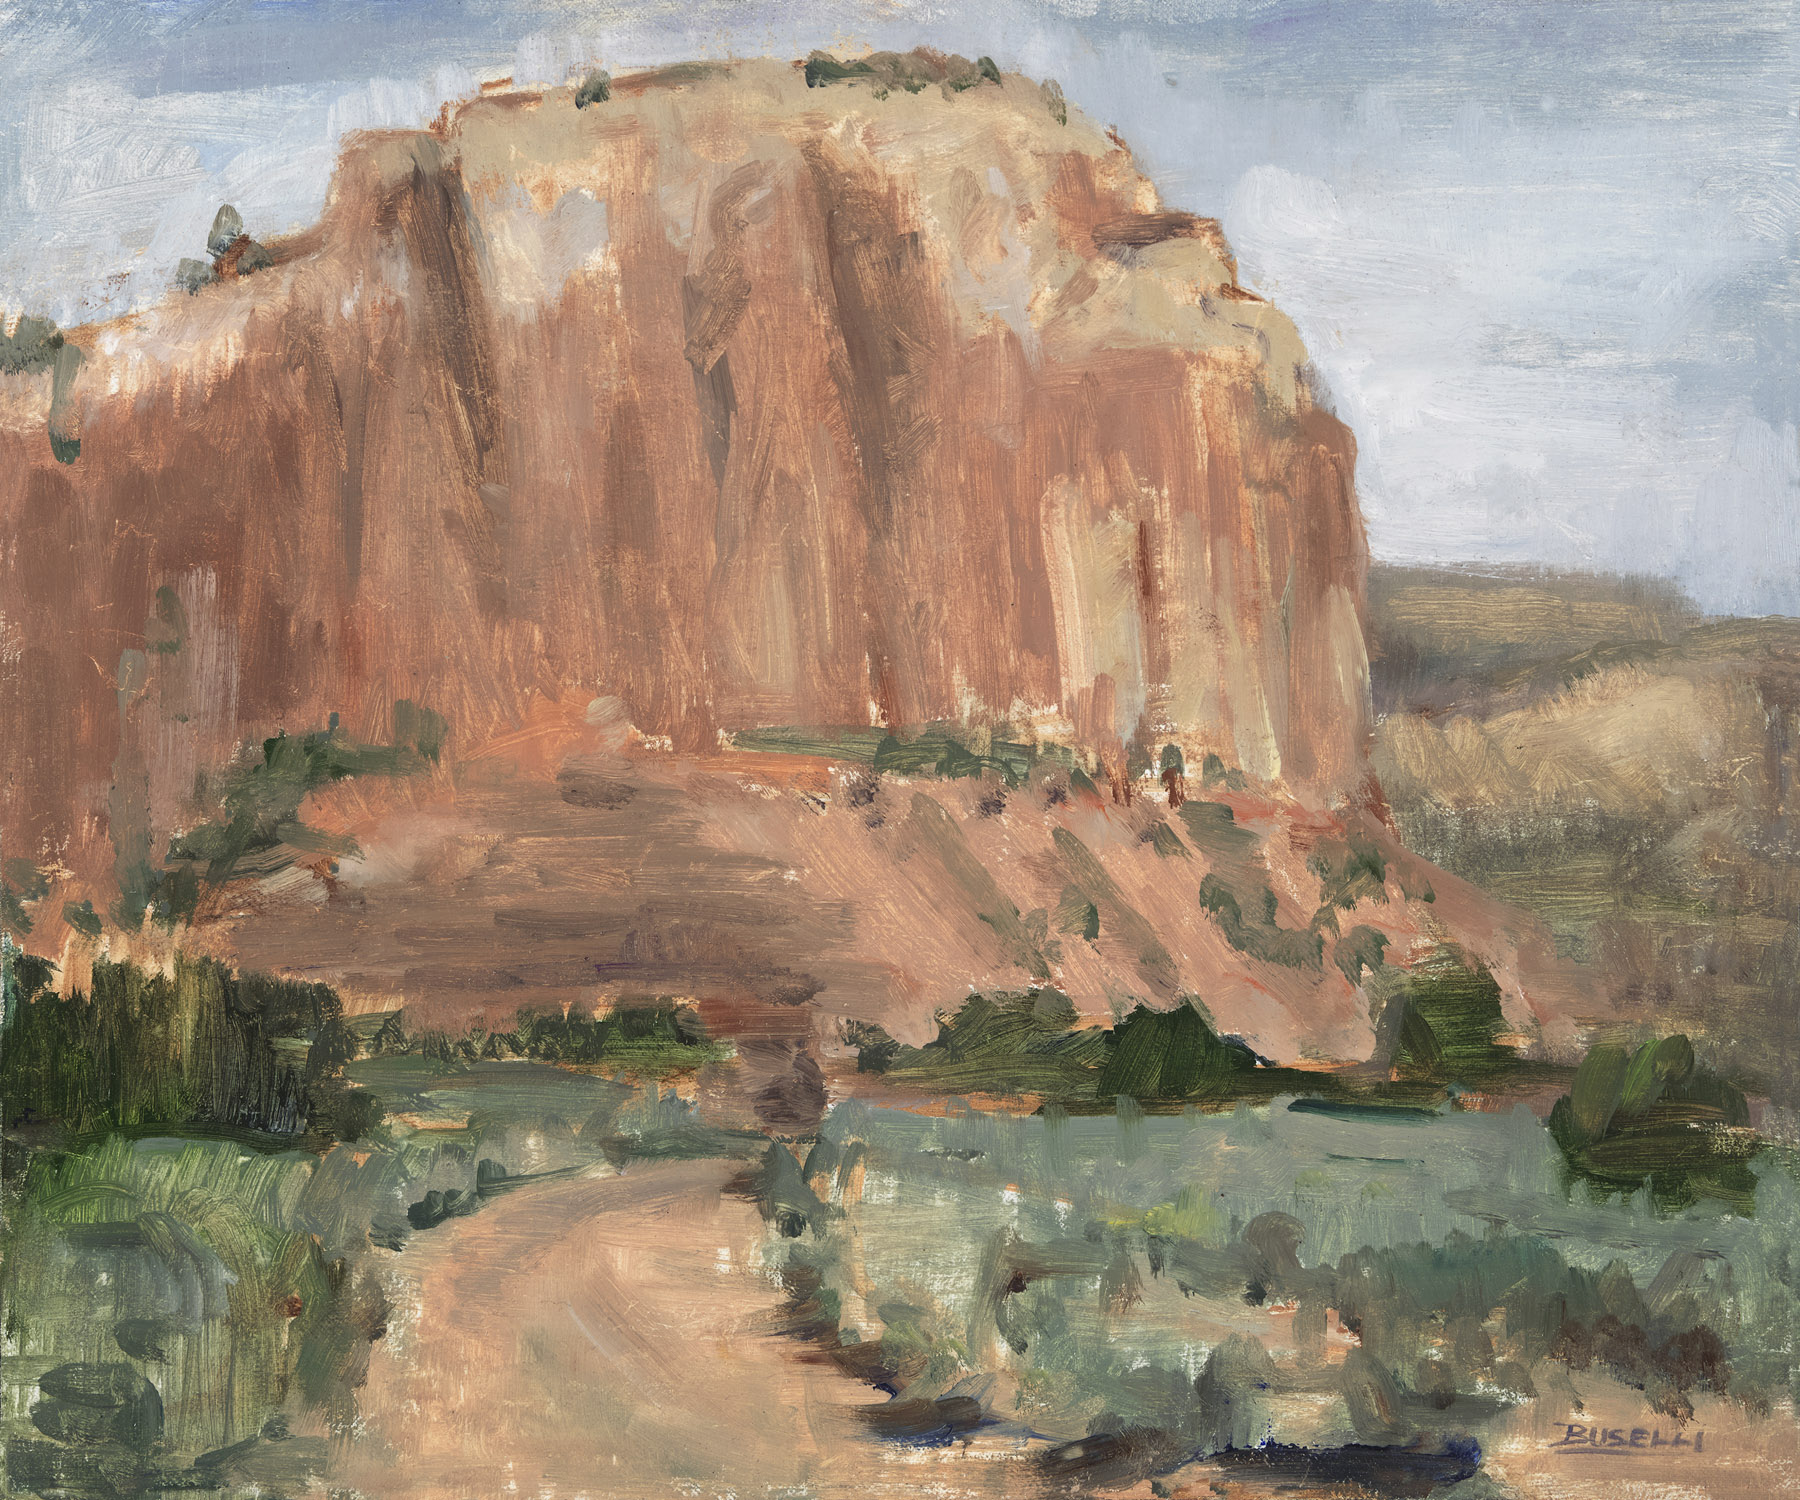  “ENCOUNTERS OF THE RED ROCK KIND”,  GHOST RANCH, NM  oil on linen | 10” x 12” 